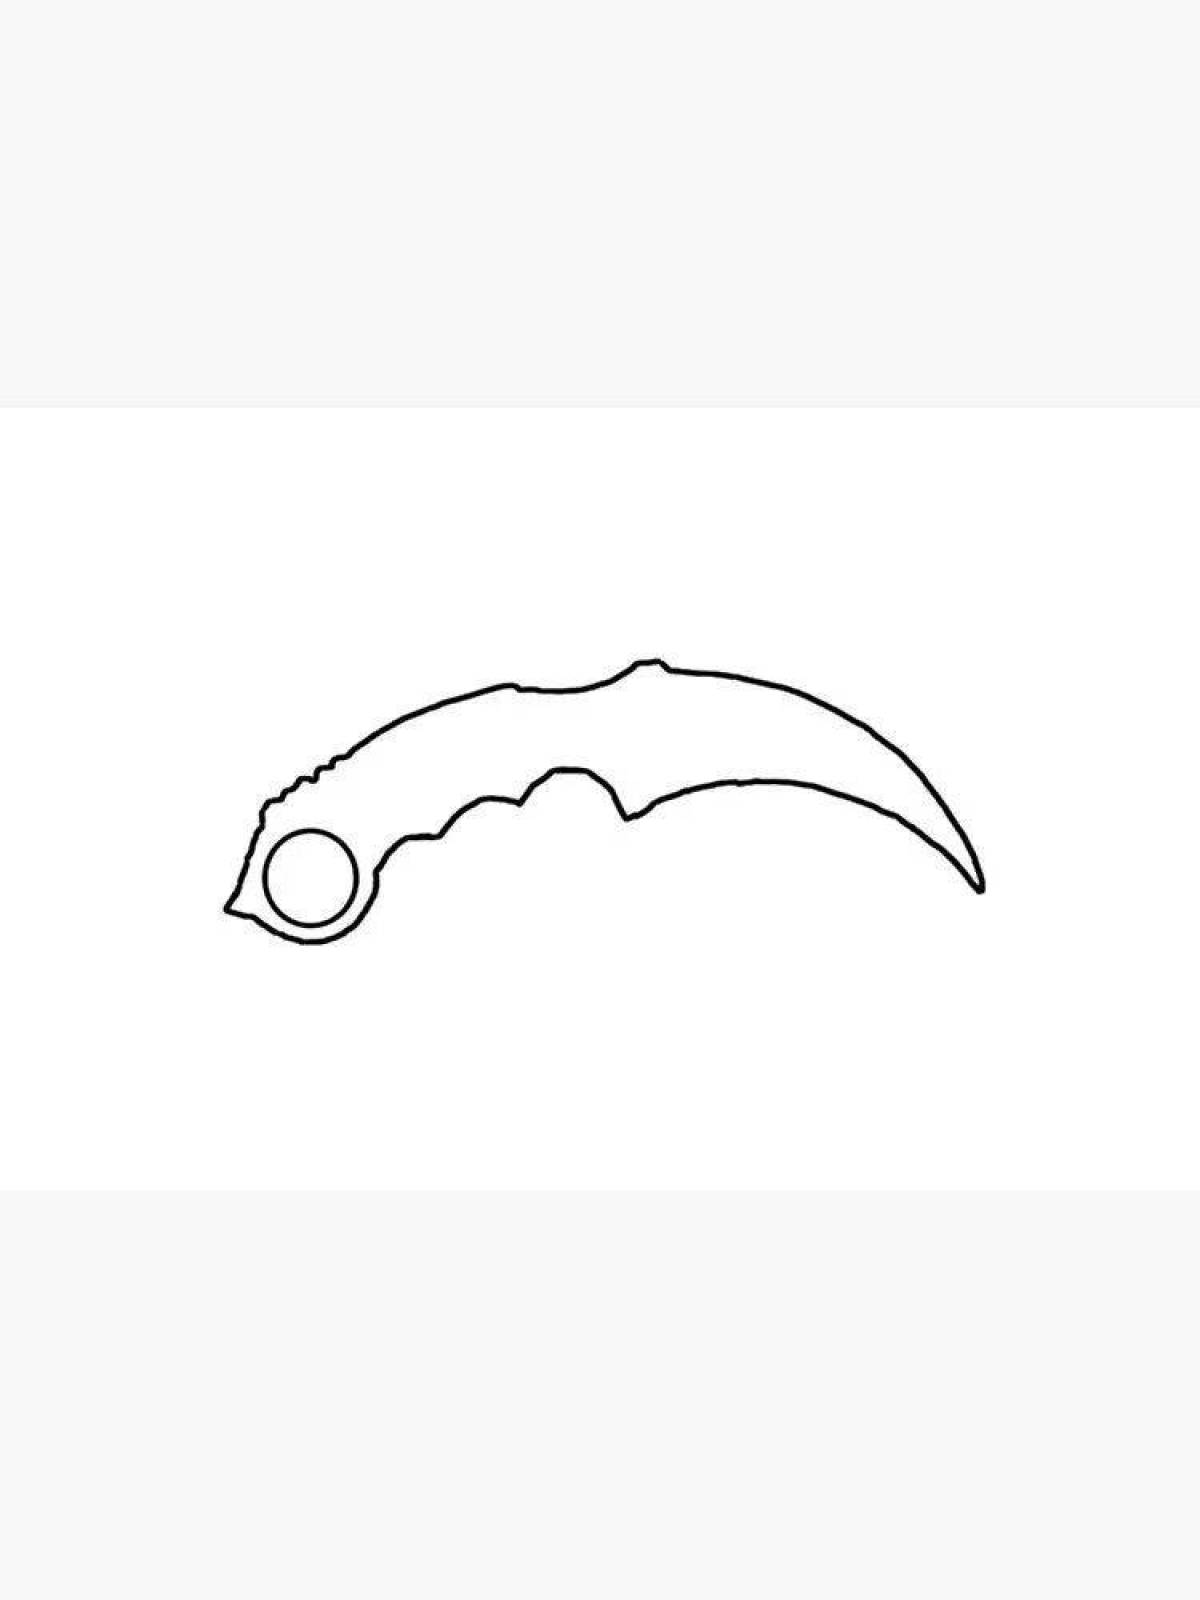 Exquisite karambit knife coloring page